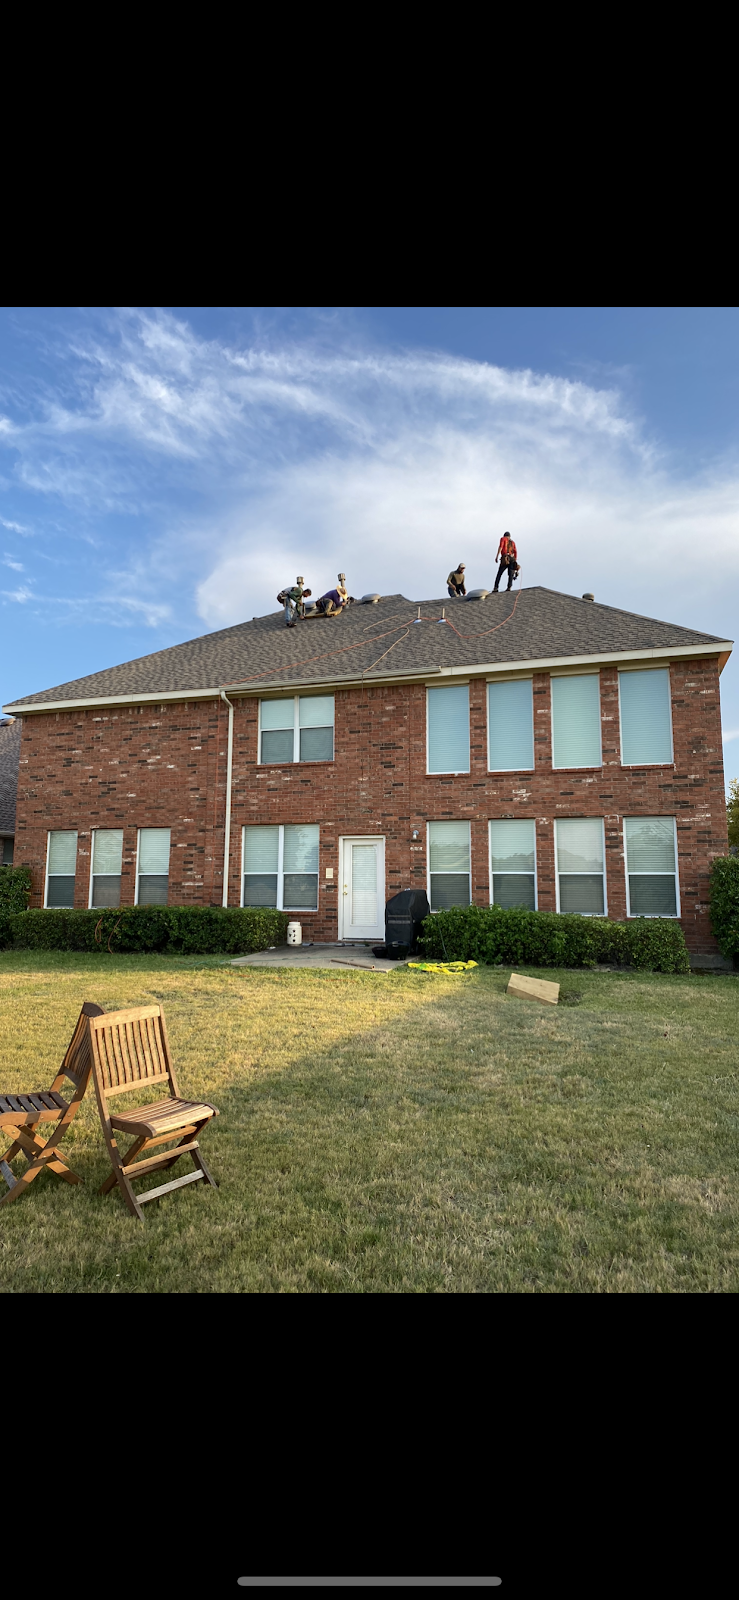 My Roofing Crews and Construction LLC | 1504 Kim Loan Dr, Princeton, TX 75407 | Phone: (469) 901-4192